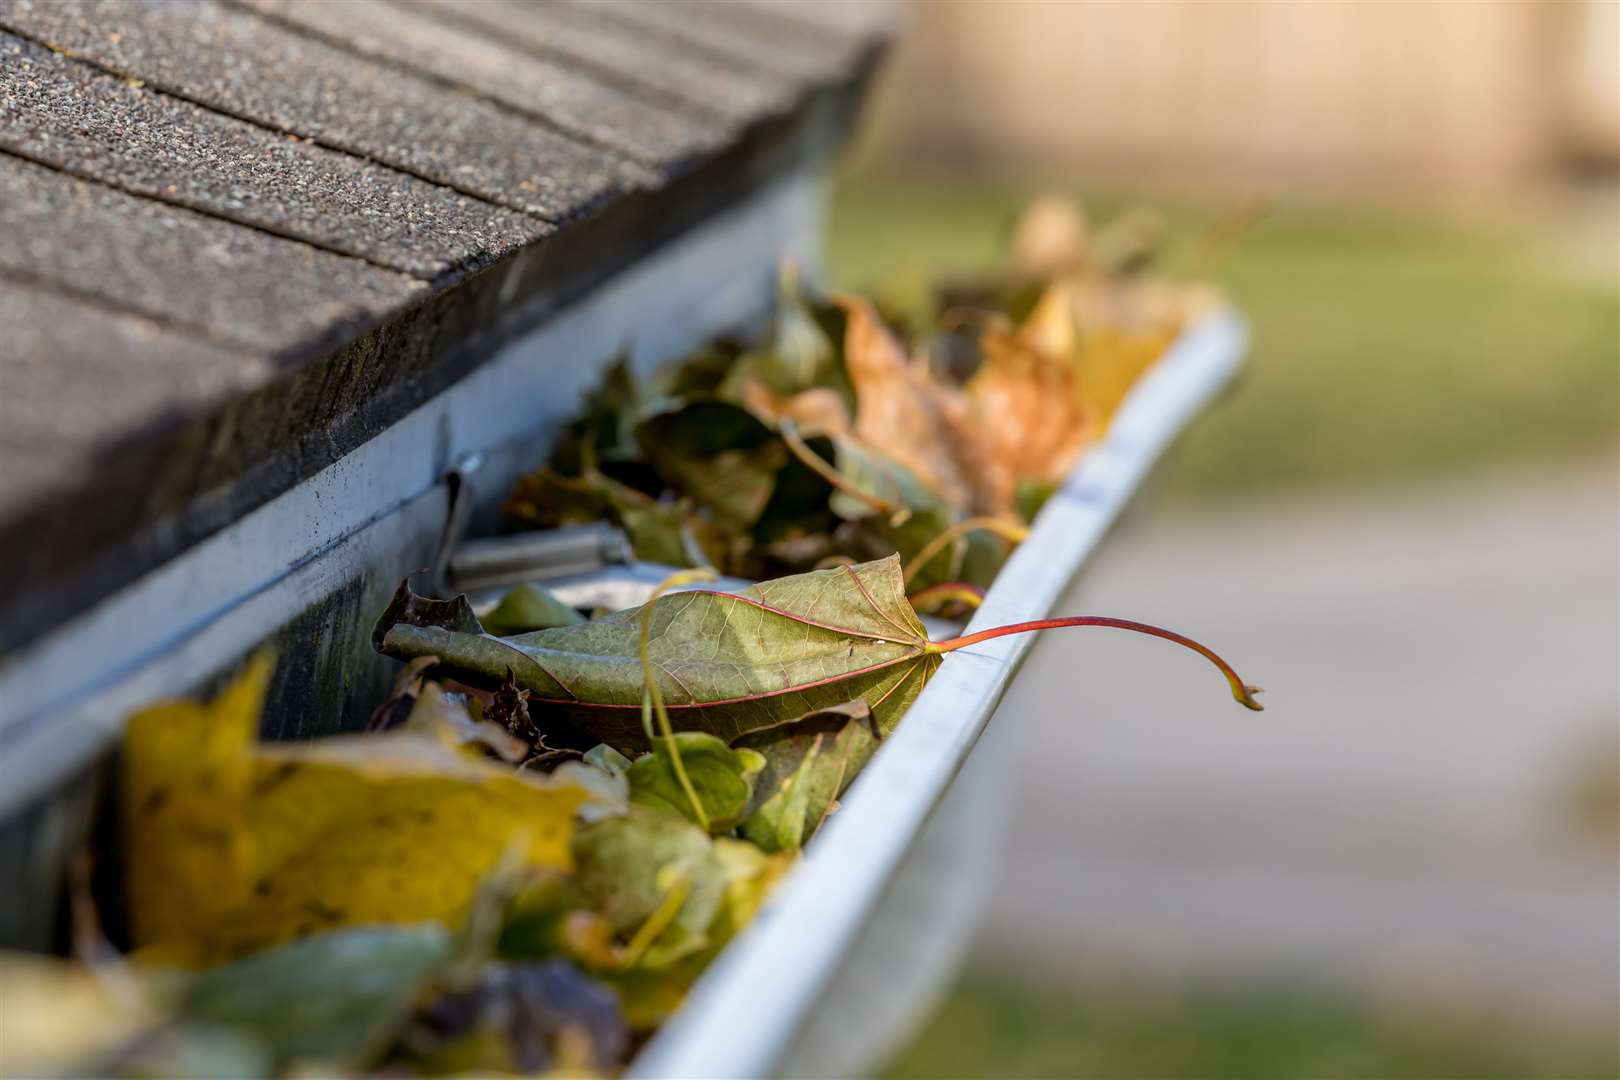 Keep gutters clear of leaves and debris. Picture: iStock/PA